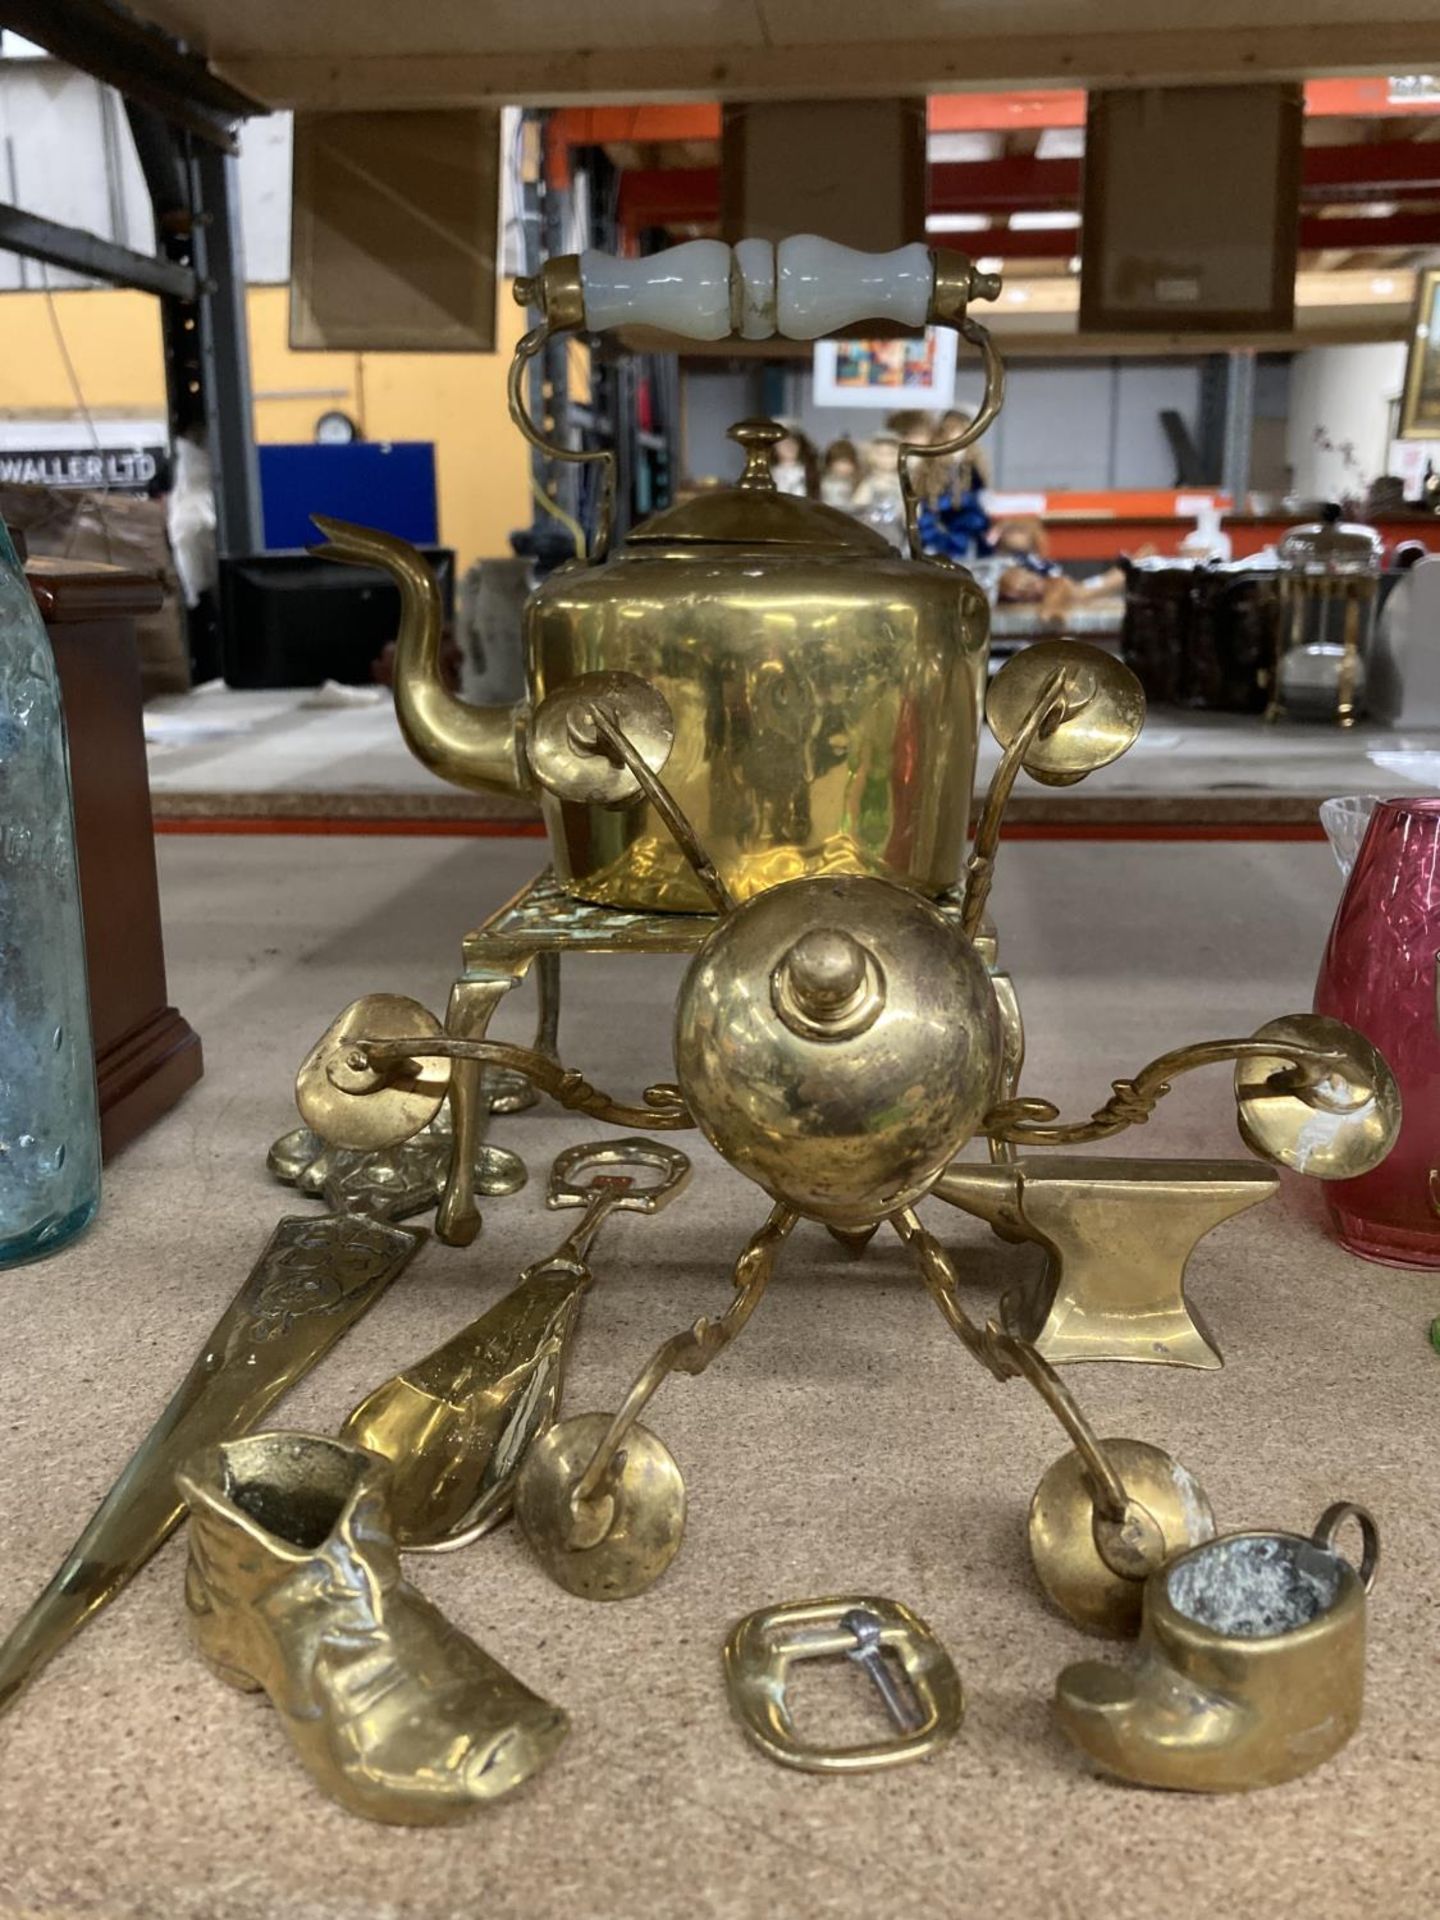 VARIOUS BRASS ITEMS TO INCLUDE A KETTLE WITH CERAMIC HANDLE ON A TRIVET, A SMALL ANVIL BOOT, ETC